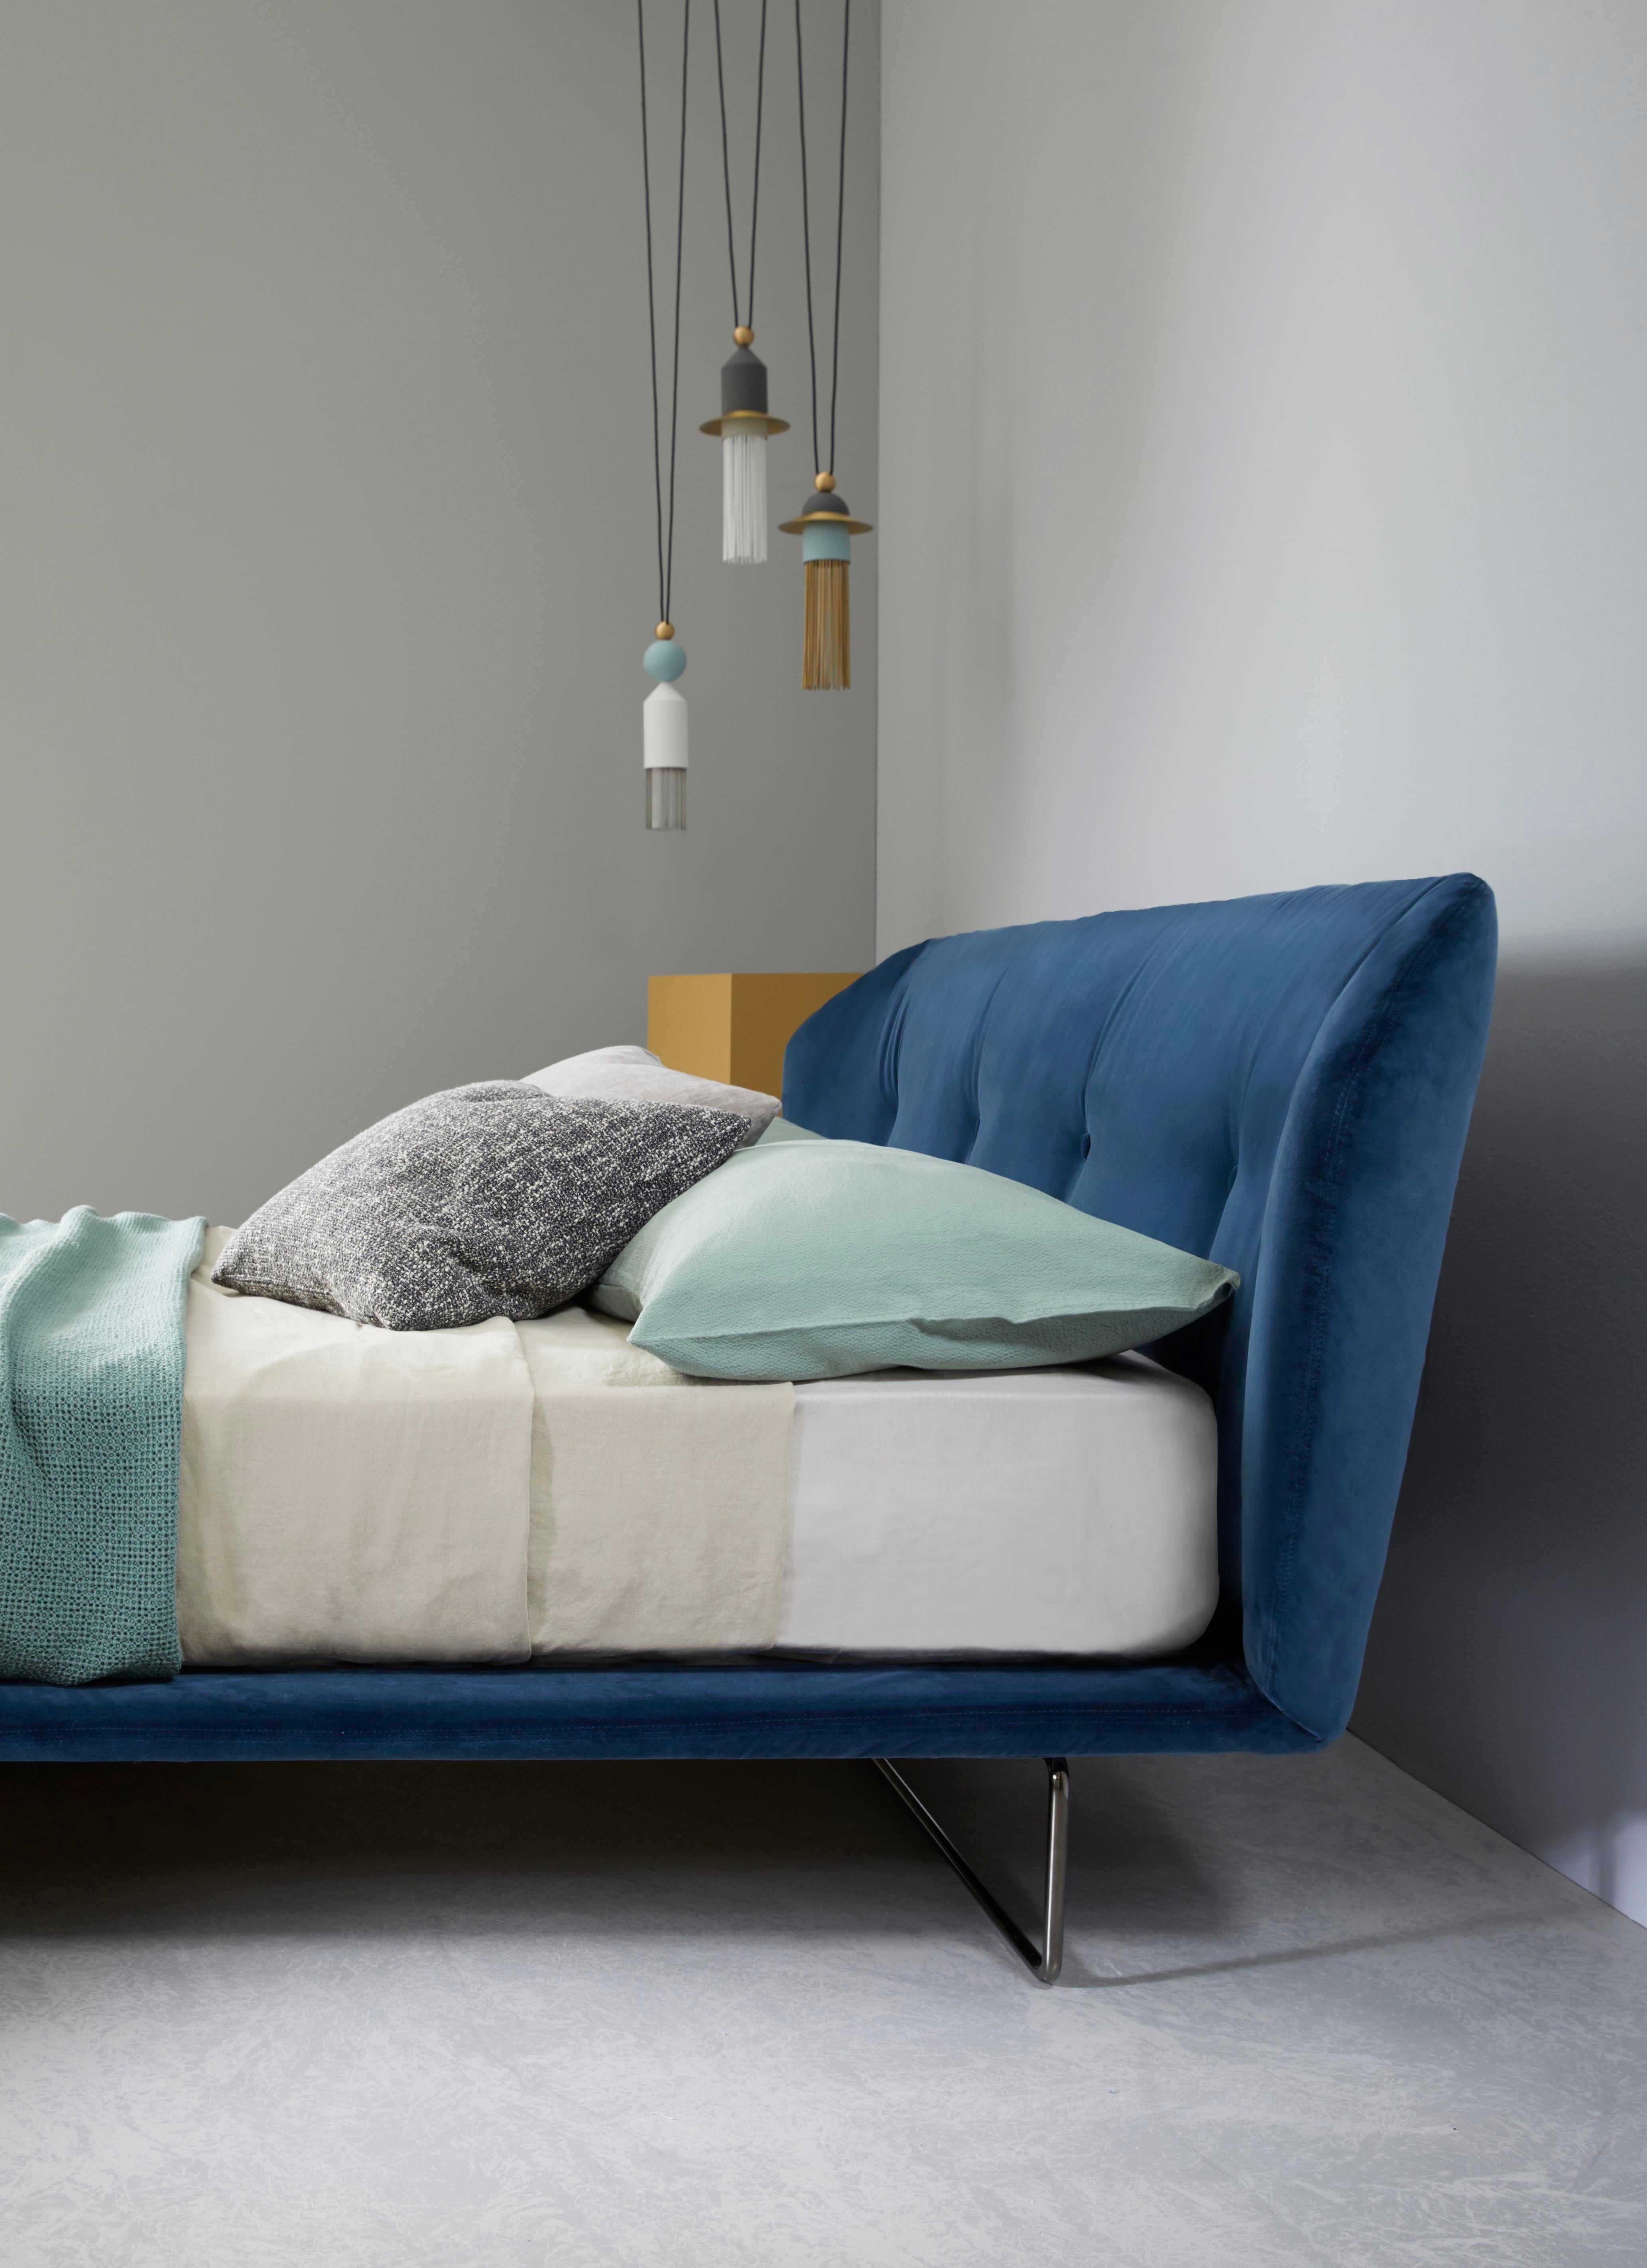 The New York Air bed follows the same line of the sofa collection exhibiting all its retro elegance mixed with a contemporary soul and timeless spirit. A bed of two identities and characterised by the hexagonal shape and quilted detailing of the